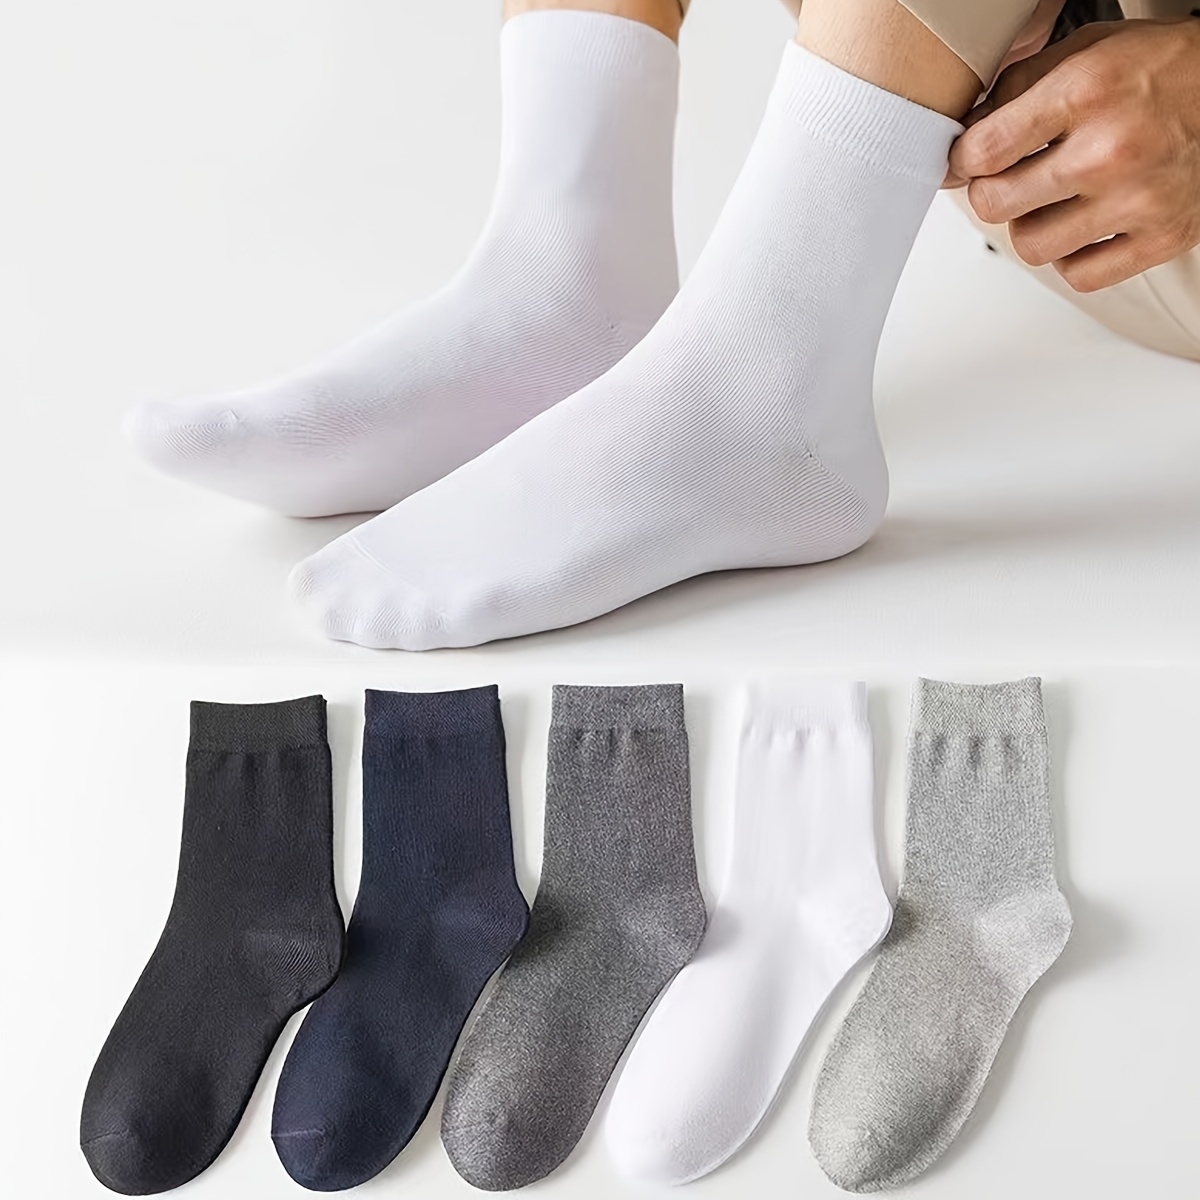 

10 Pairs Of Men's Solid Color Mid-calf Socks Business Socks Spring, Summer And Autumn Breathable Sweat-absorbent Cotton Socks Casual Socks For All Seasons